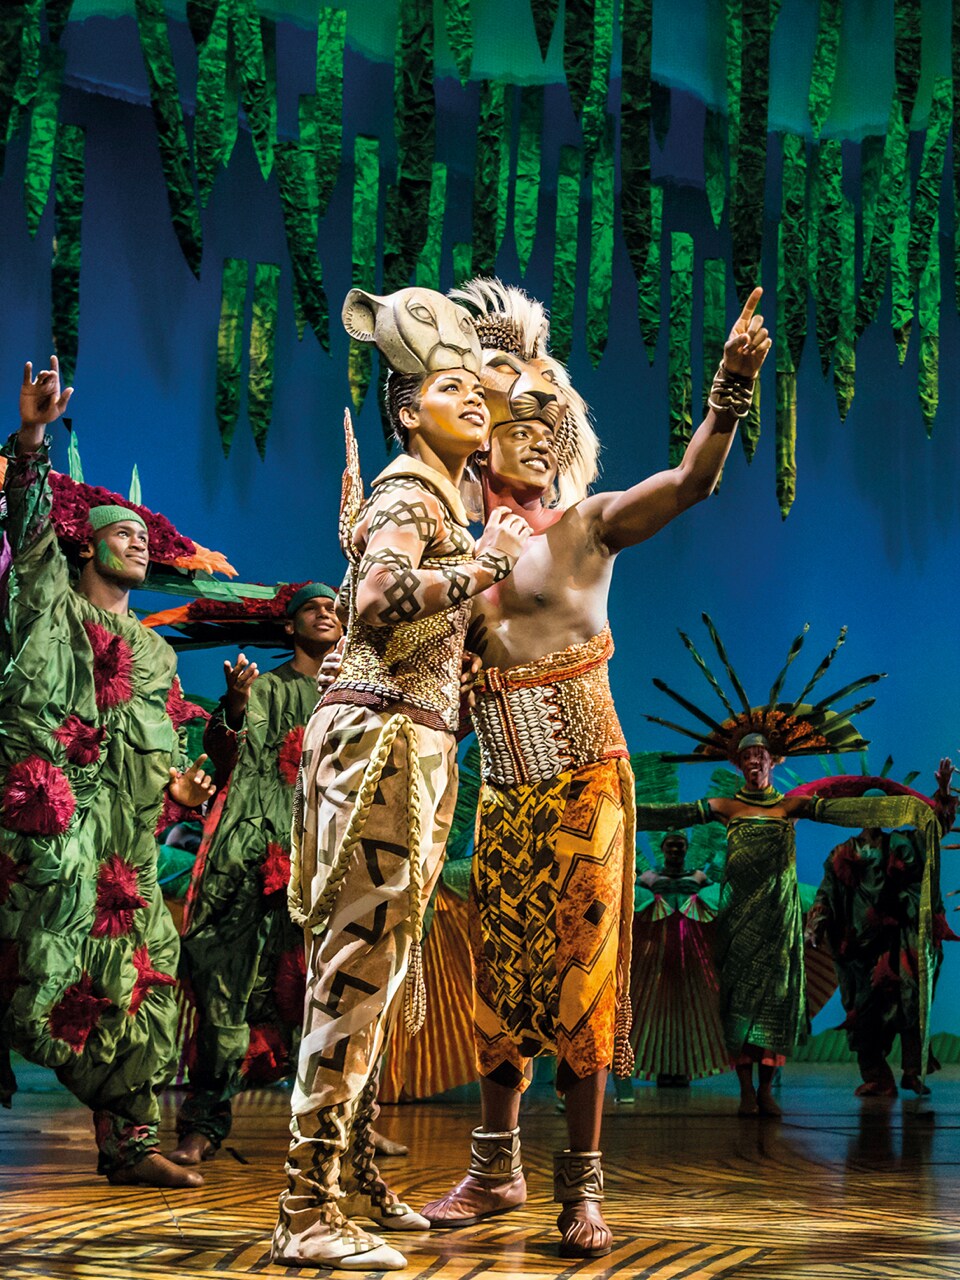 The Lion King the Musical actors on stage